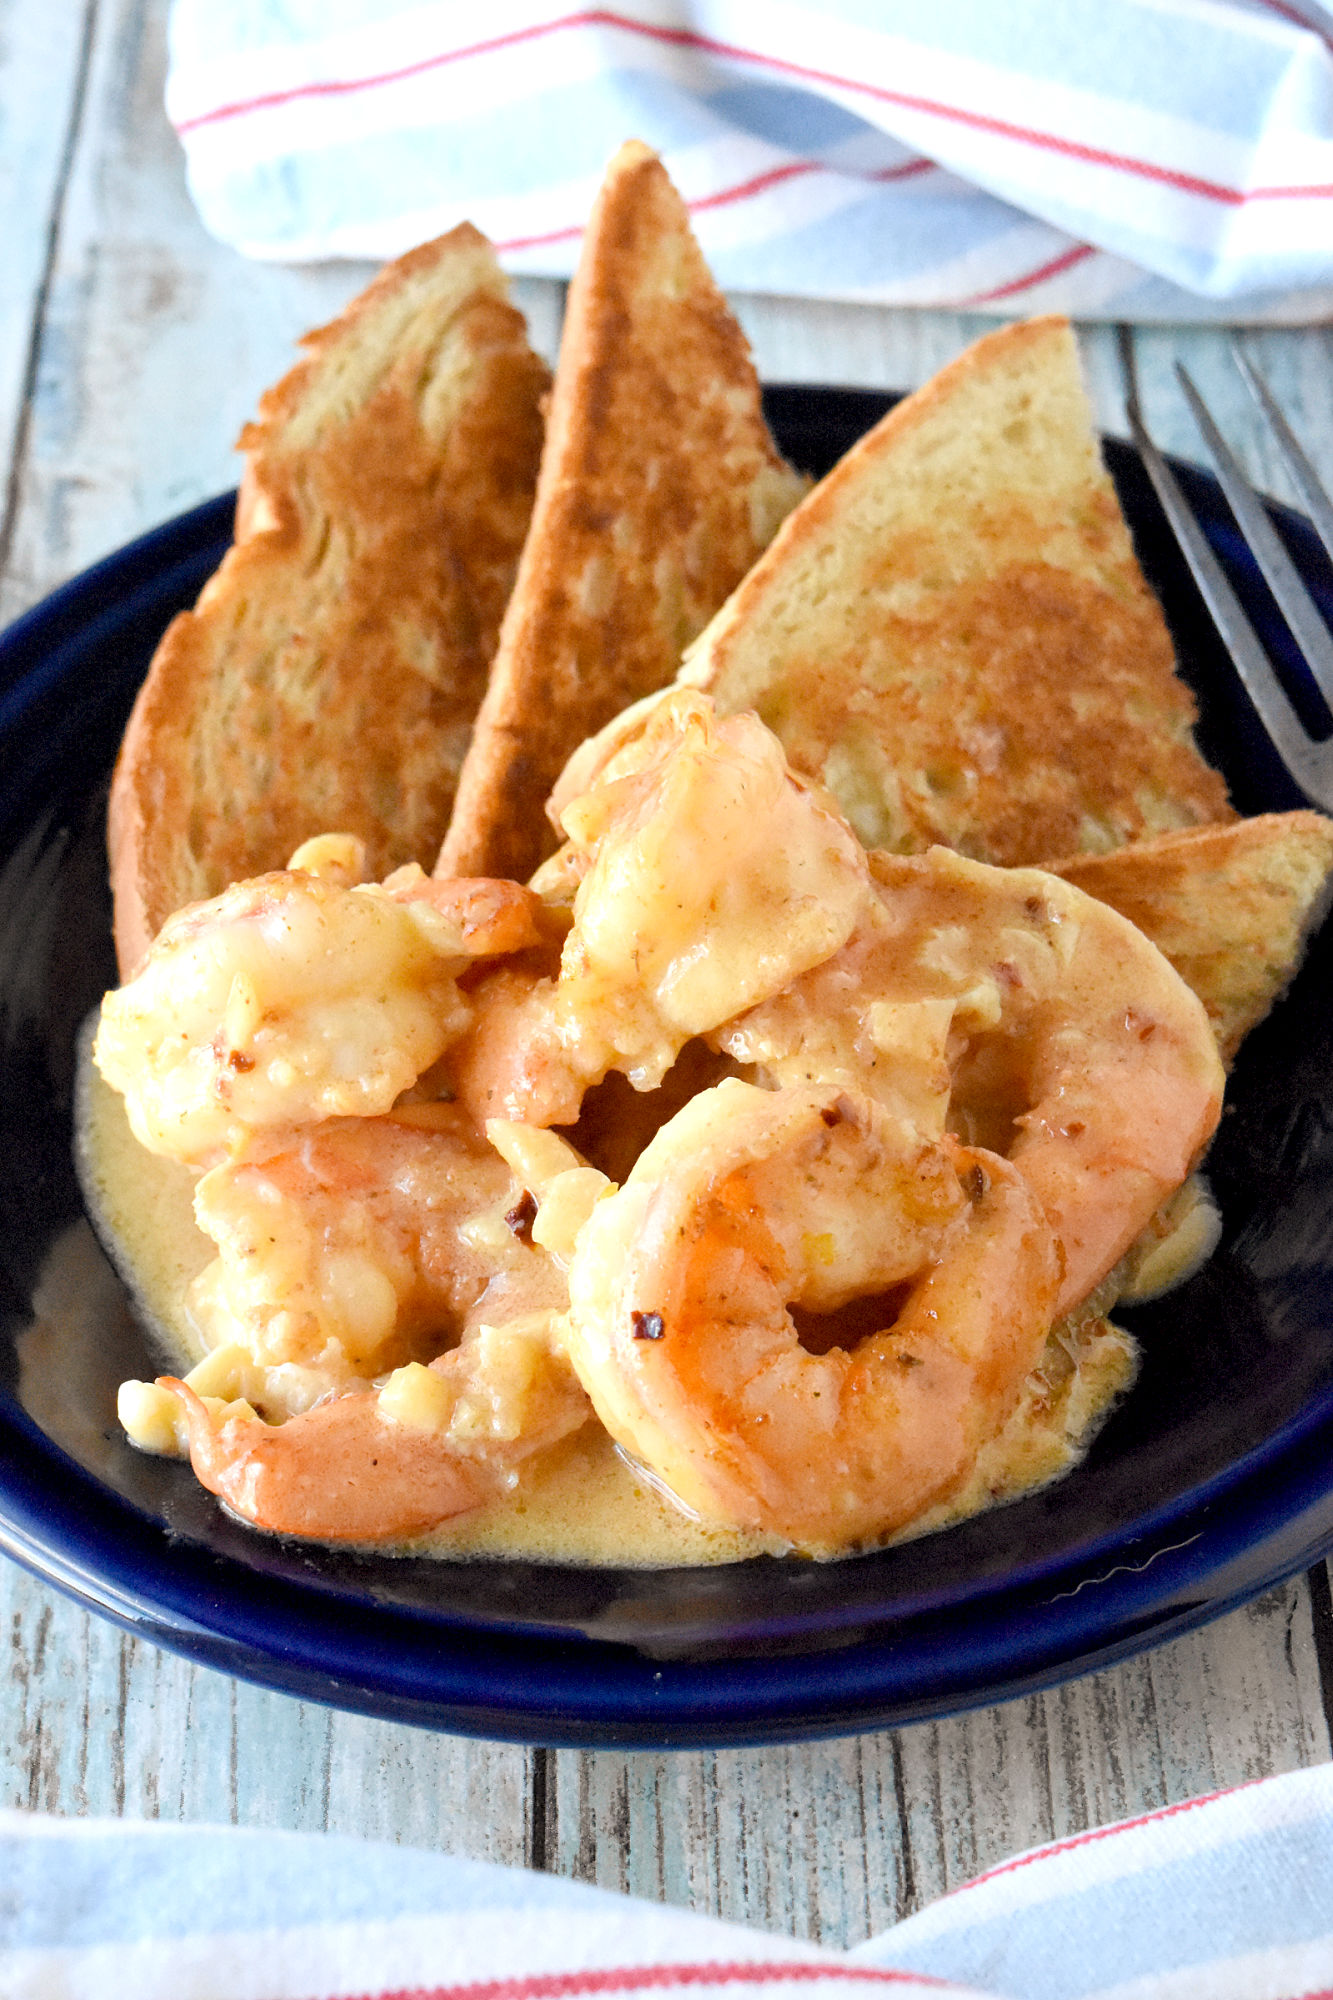 Satisfy Your Cravings with this Creamy Garlic Butter Shrimp Scampi.  It’s an Absolute Dining Sensation with a velvety smooth sauce with a secret ingredient. #OurFamilyTable #GarlicButterShrimpScampiDelight #SeafoodLoversParadise #ShrimpScampiSensation #ButteryGarlicGoodness #SavorTheFlavors
